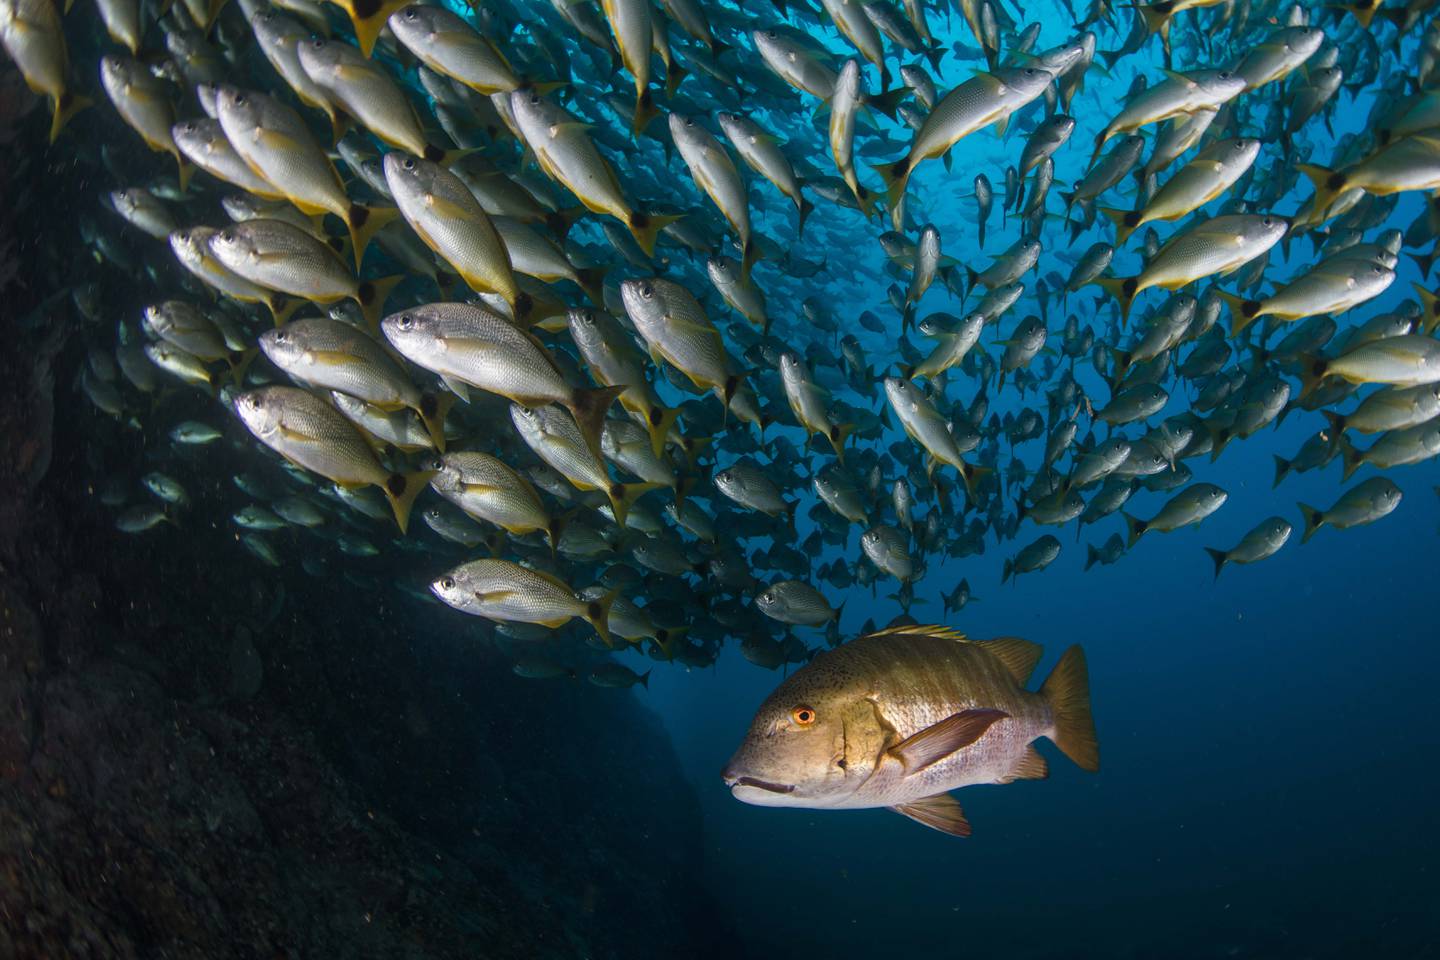 “Photograph by Enric Sala, National Geographic”. National Geographic  Pristine Seas
www.NatGeo.org/PristineSeas.